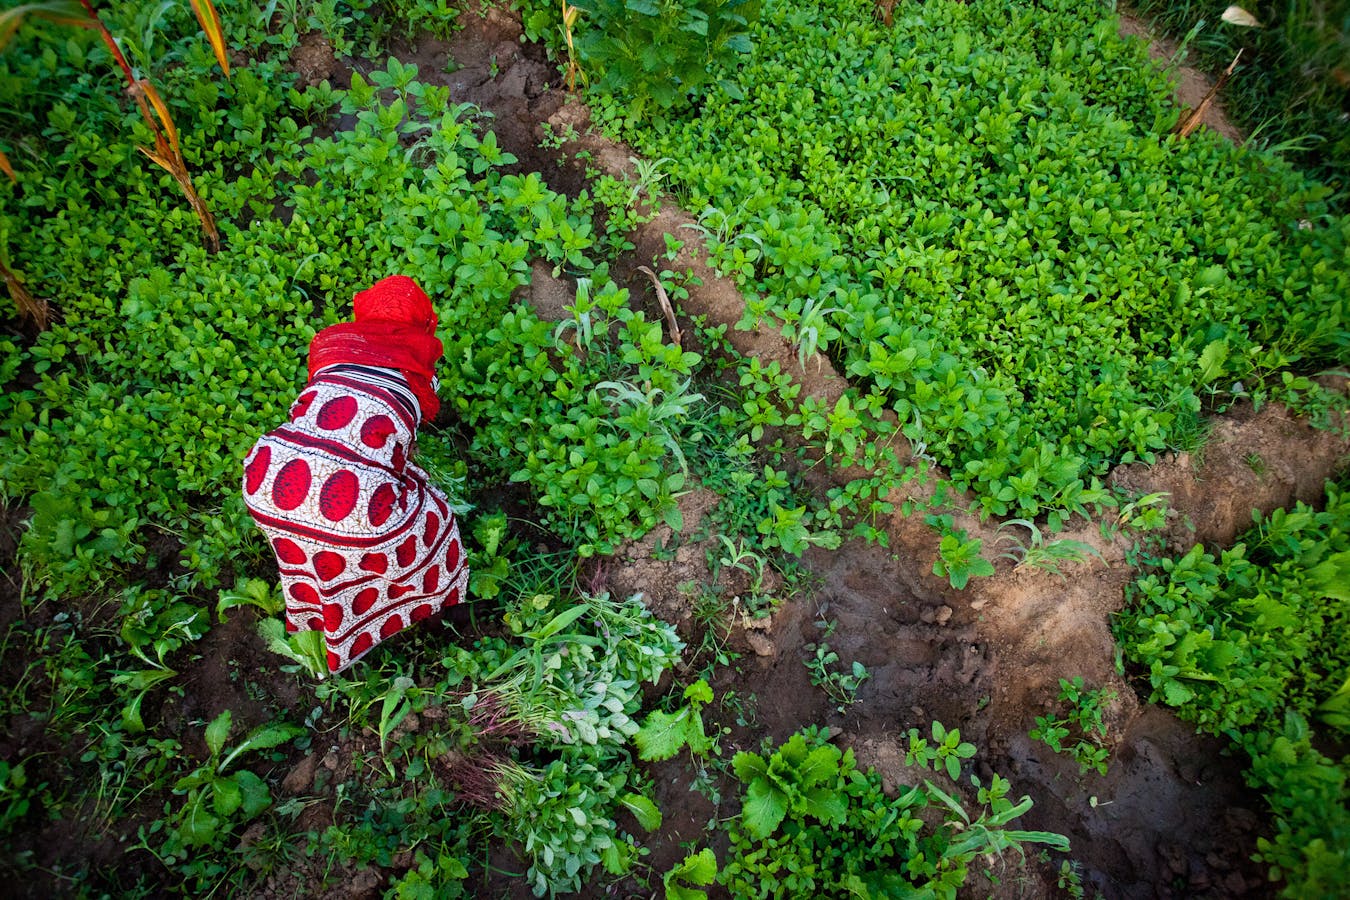 Woman harvests crops in Tanzania, the site of a Conservation International project.